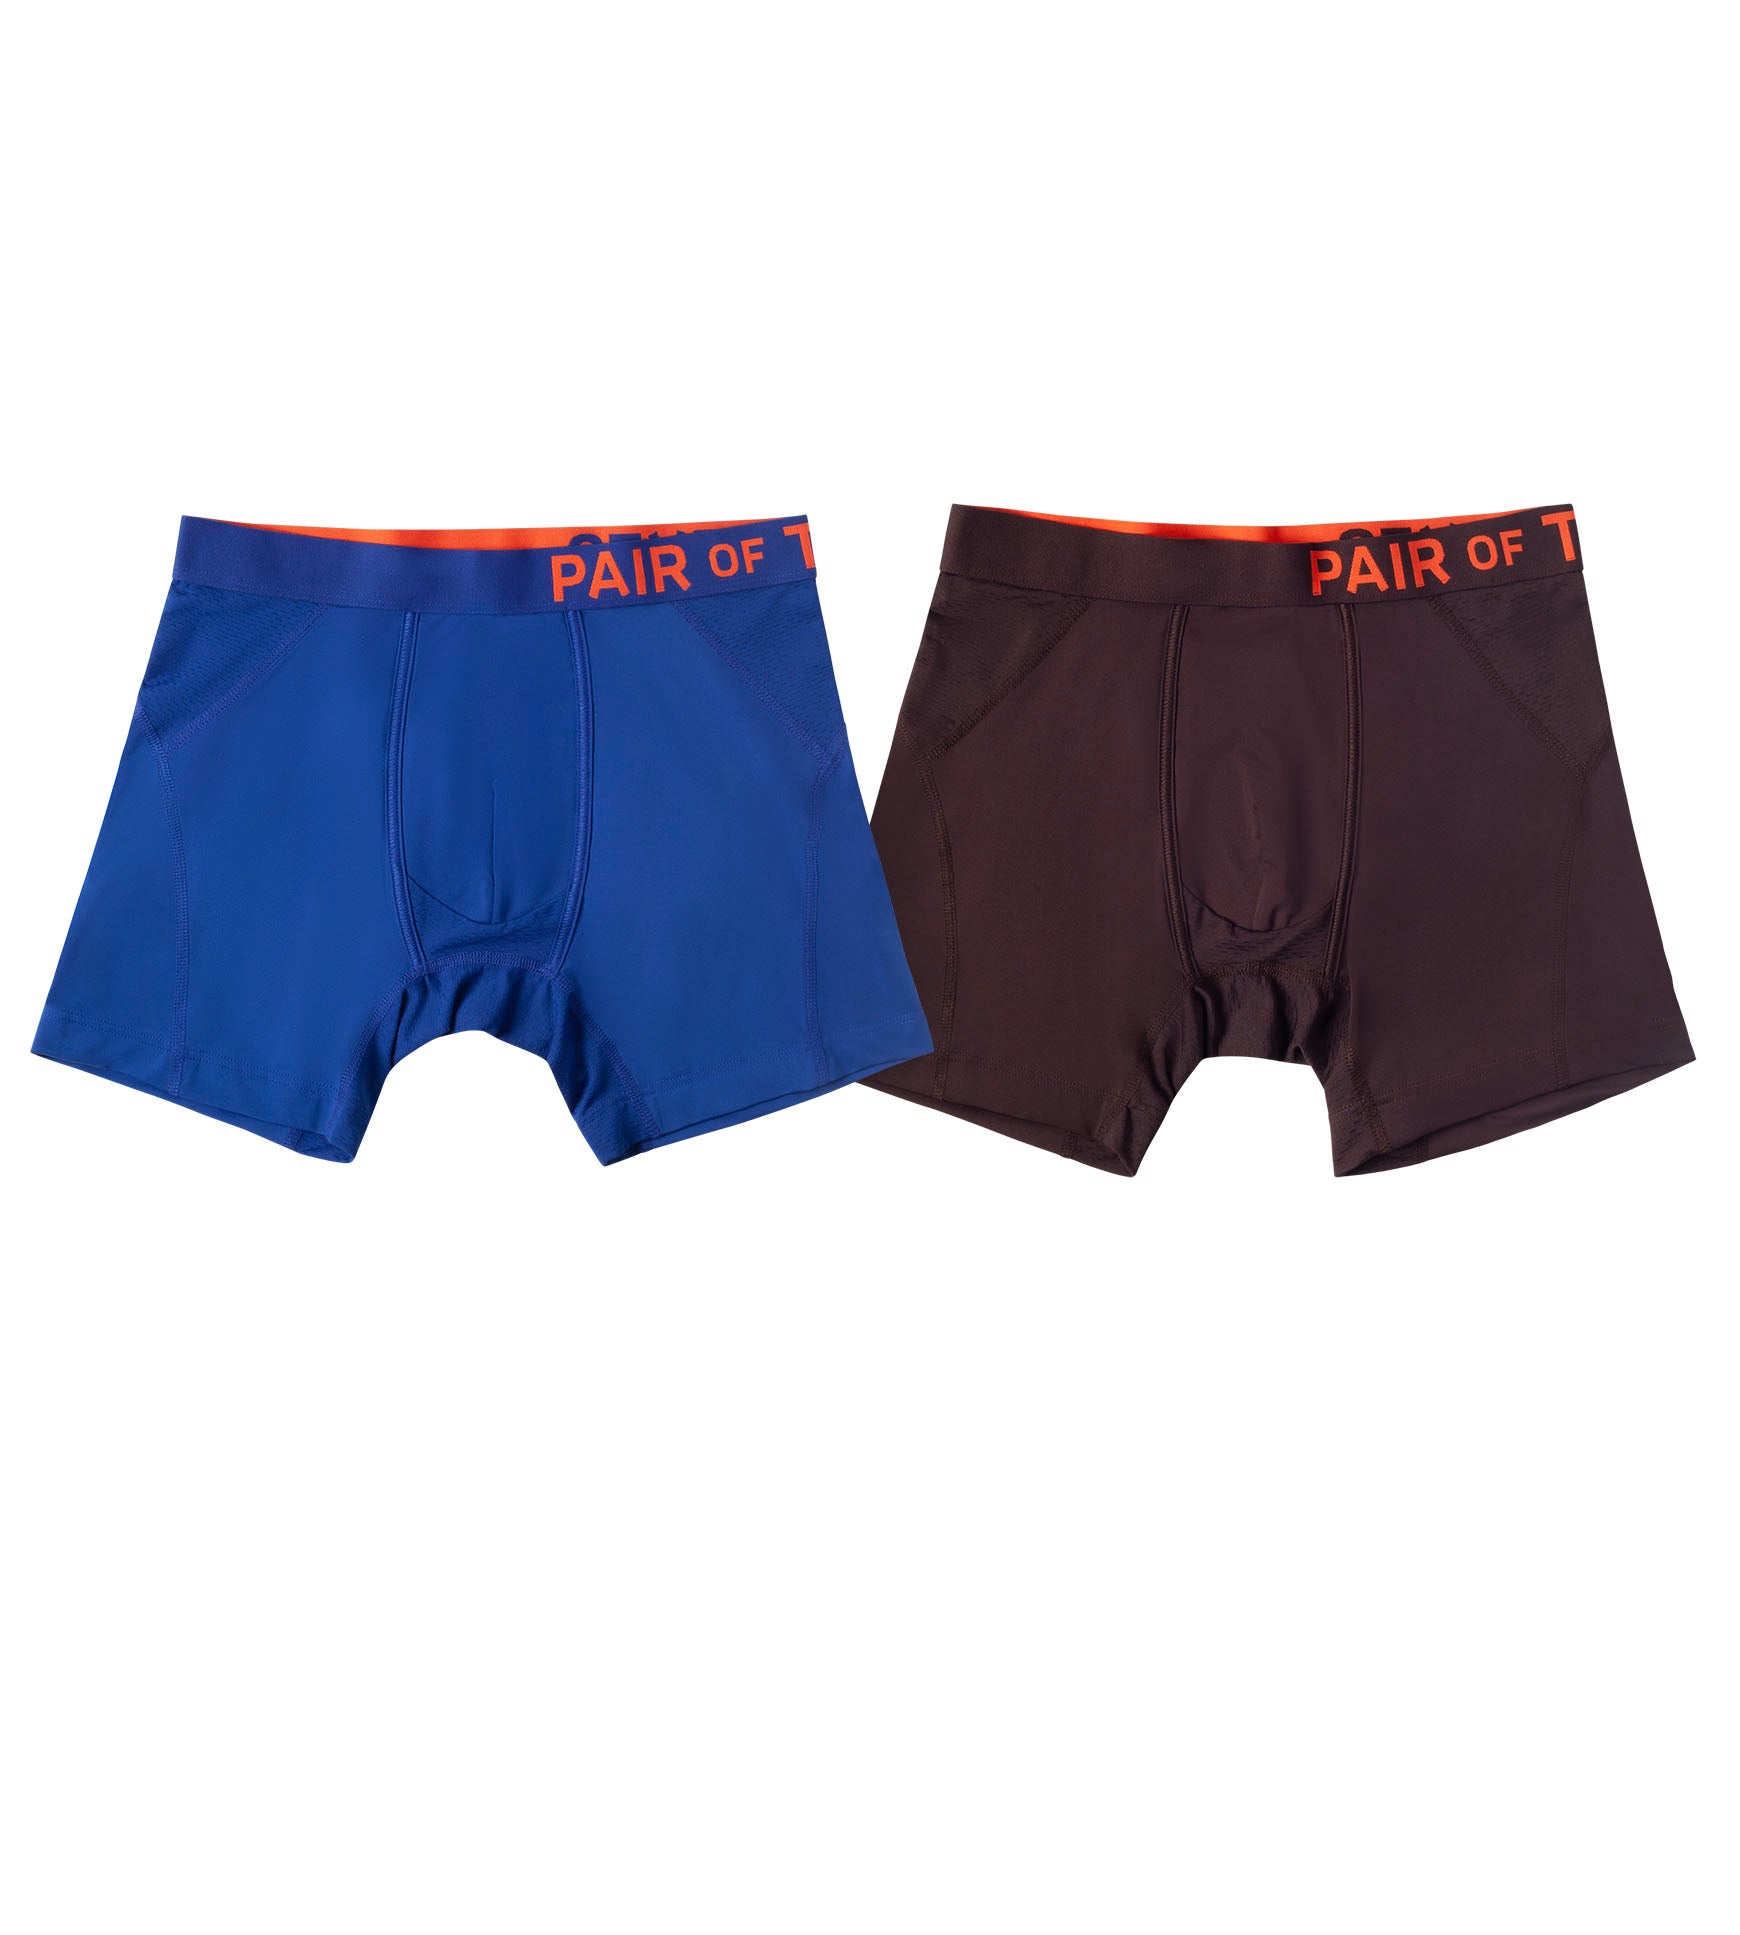 Pair Of Thieves Men's Super Fit Boxer Briefs 2pk - Red/blue/green